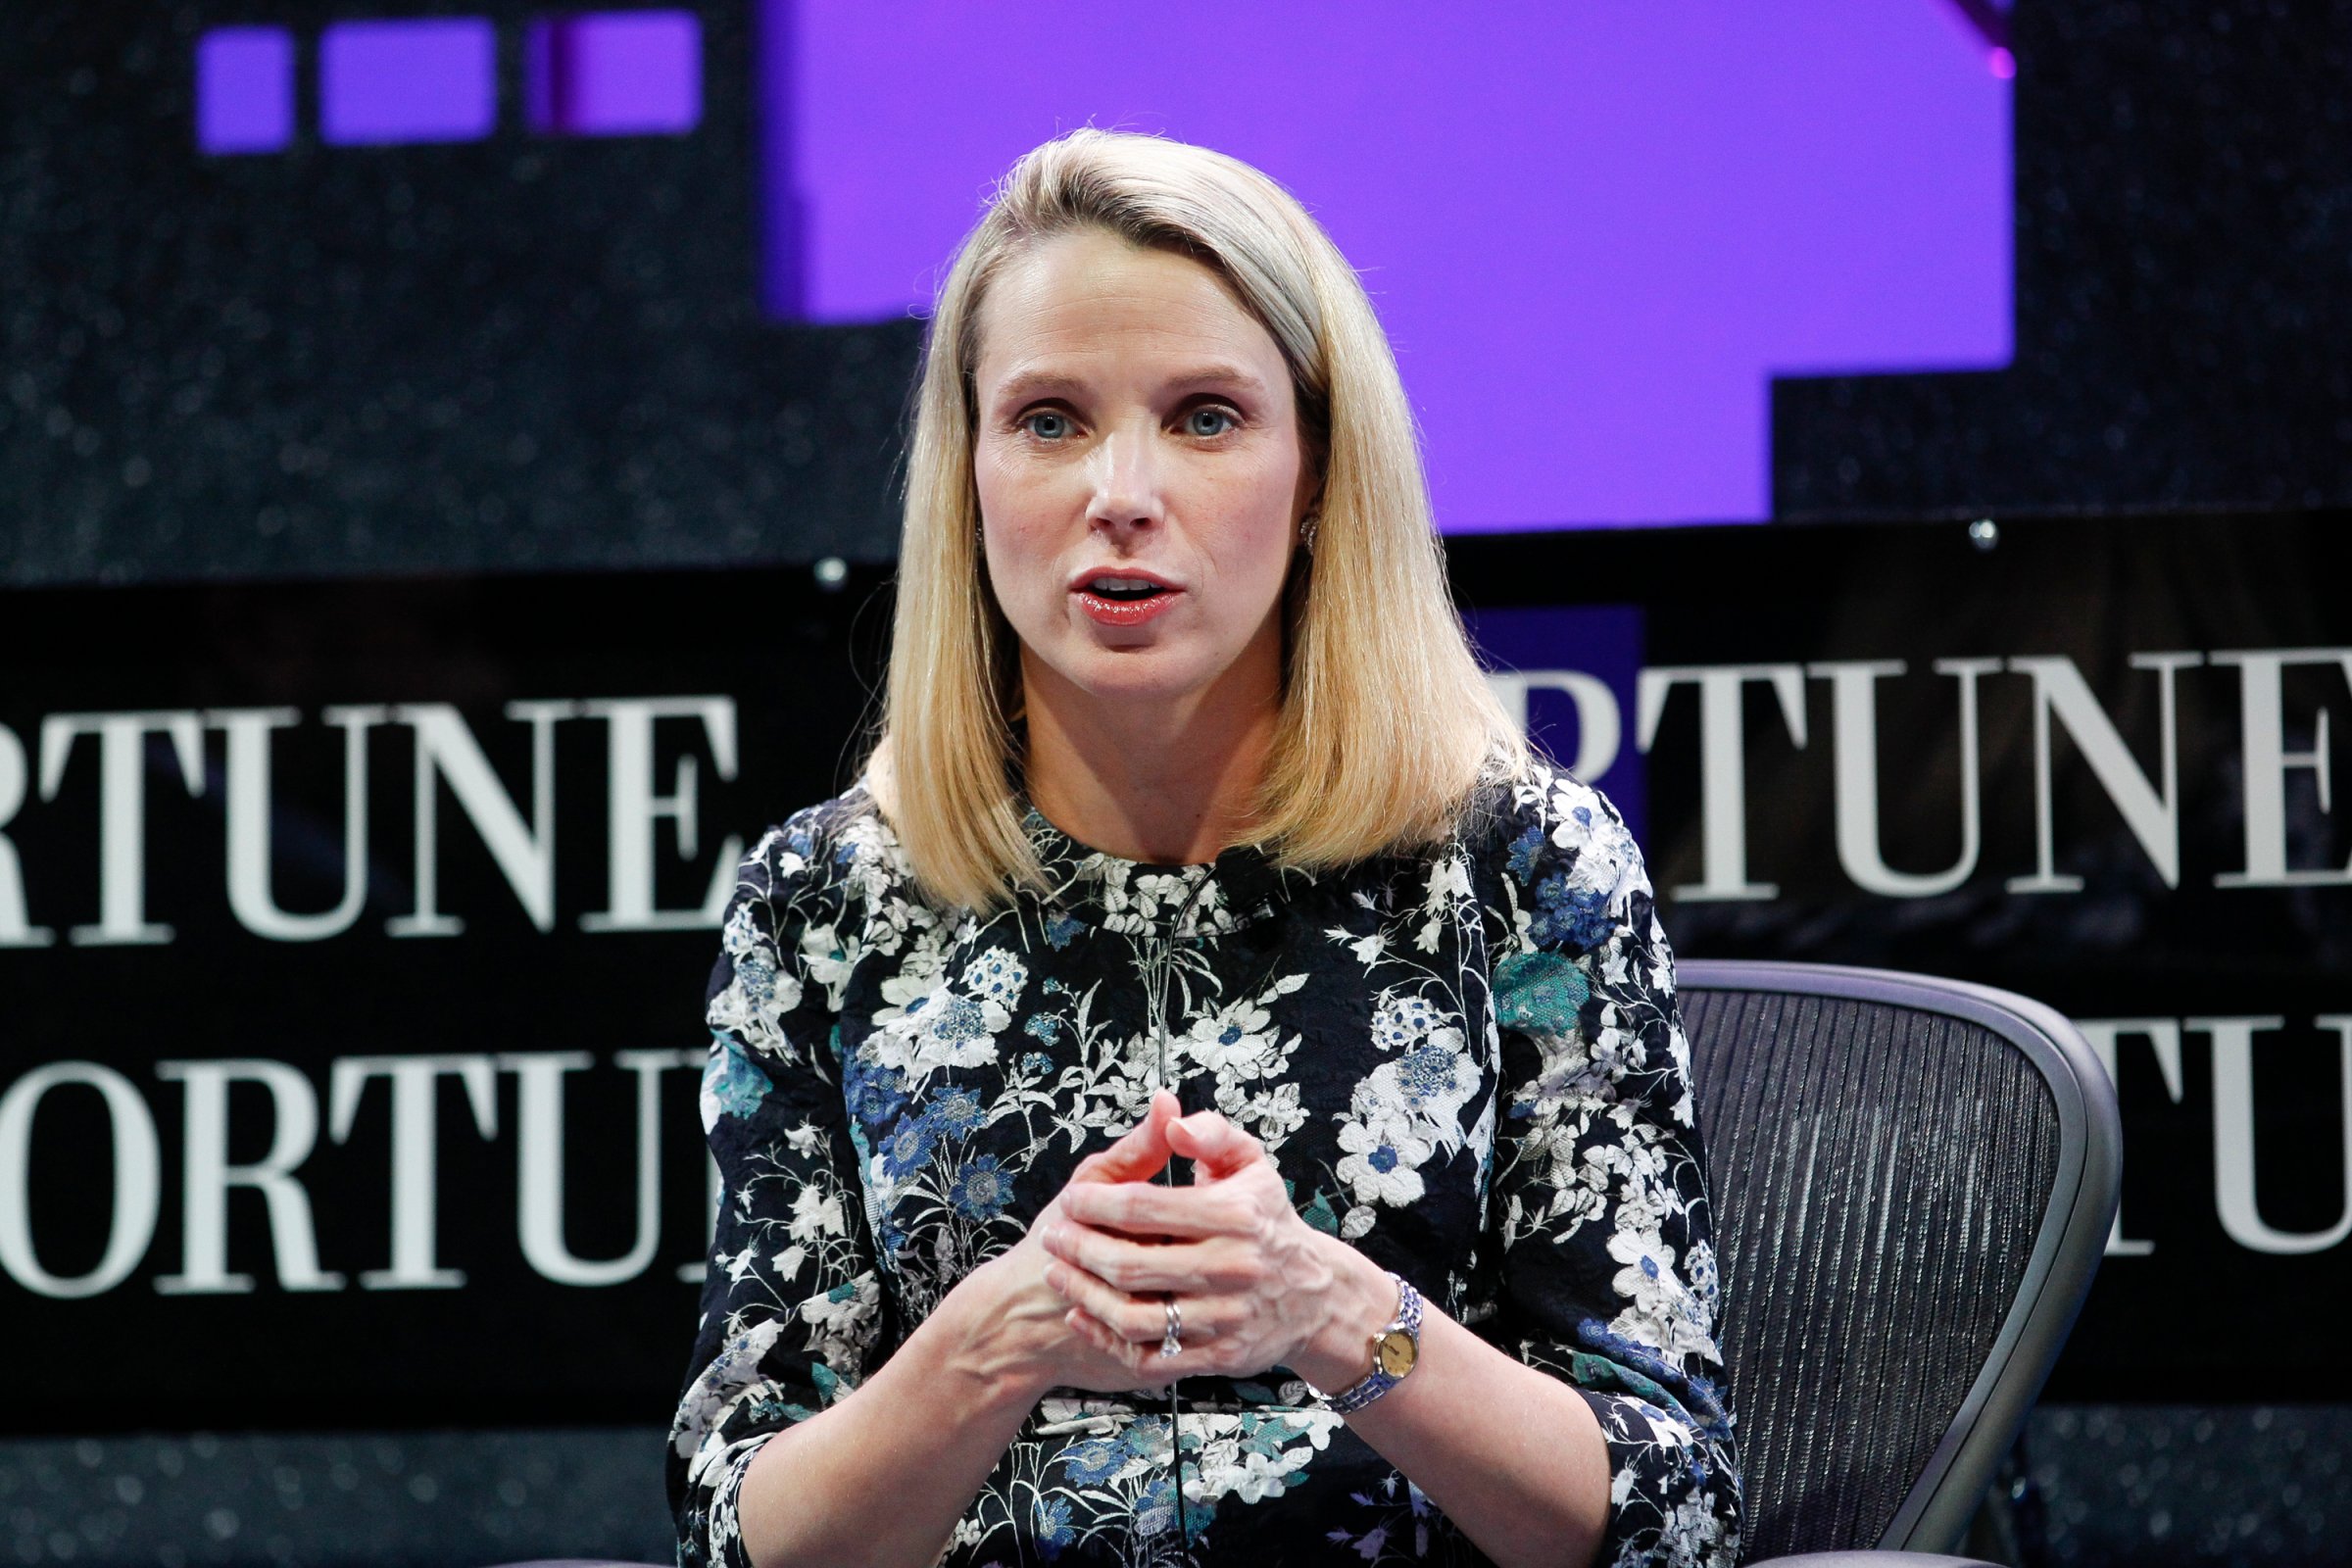 Marissa Mayer speaks during the Fortune Global Forum - Day2 at the Fairmont Hotel on Nov. 3, 2015 in San Francisco, California.